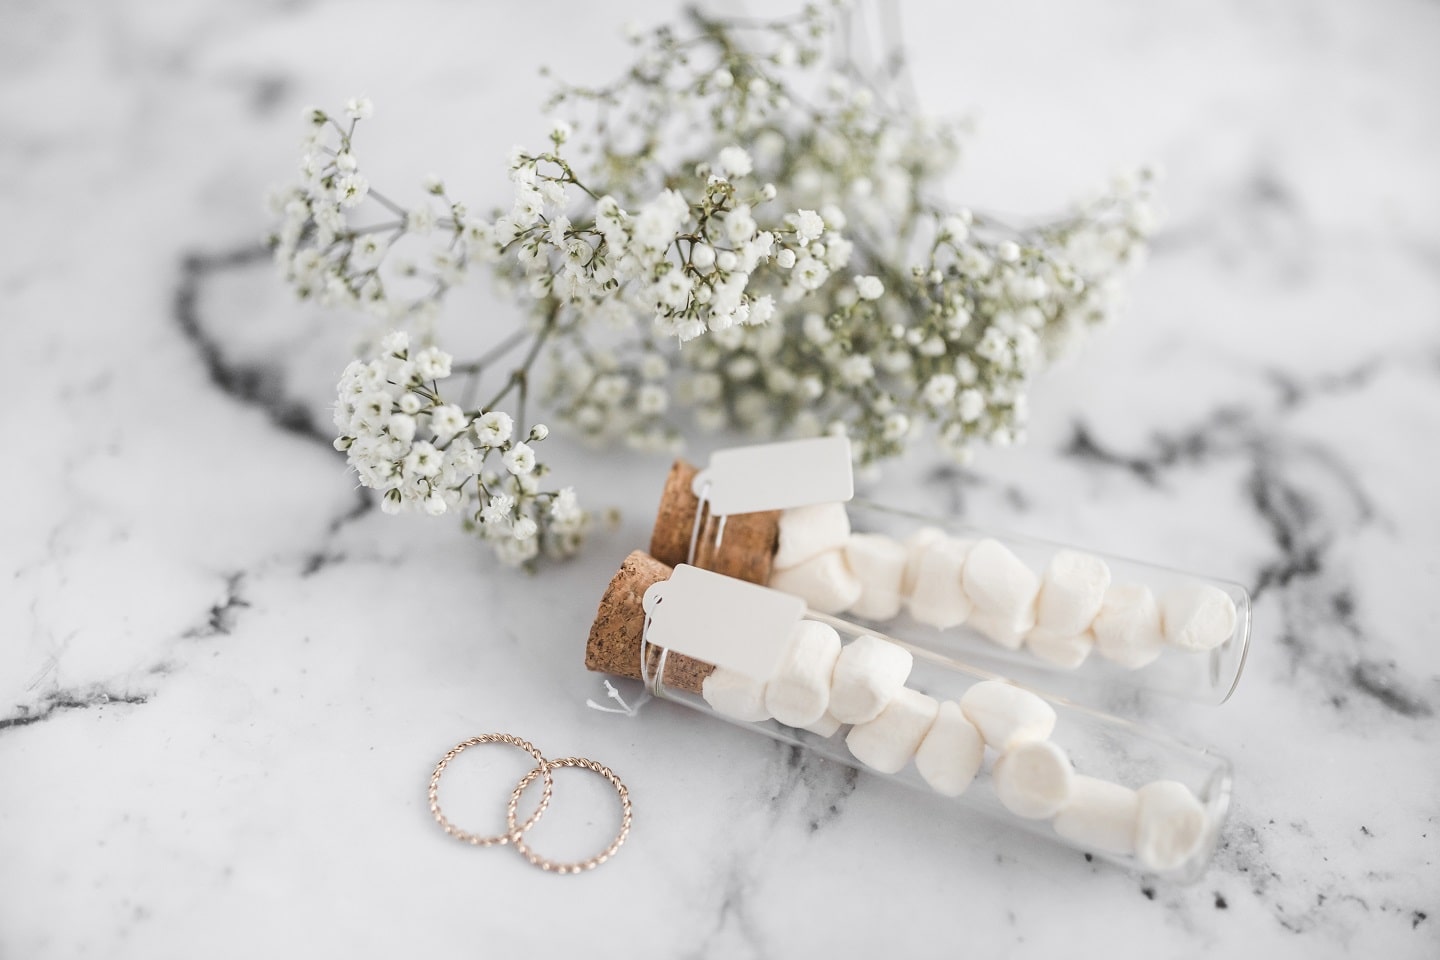 wedding-rings-marshmallow-test-tubes-with-tag-baby-s-breath-flowers-white-textured-background-min.jpg